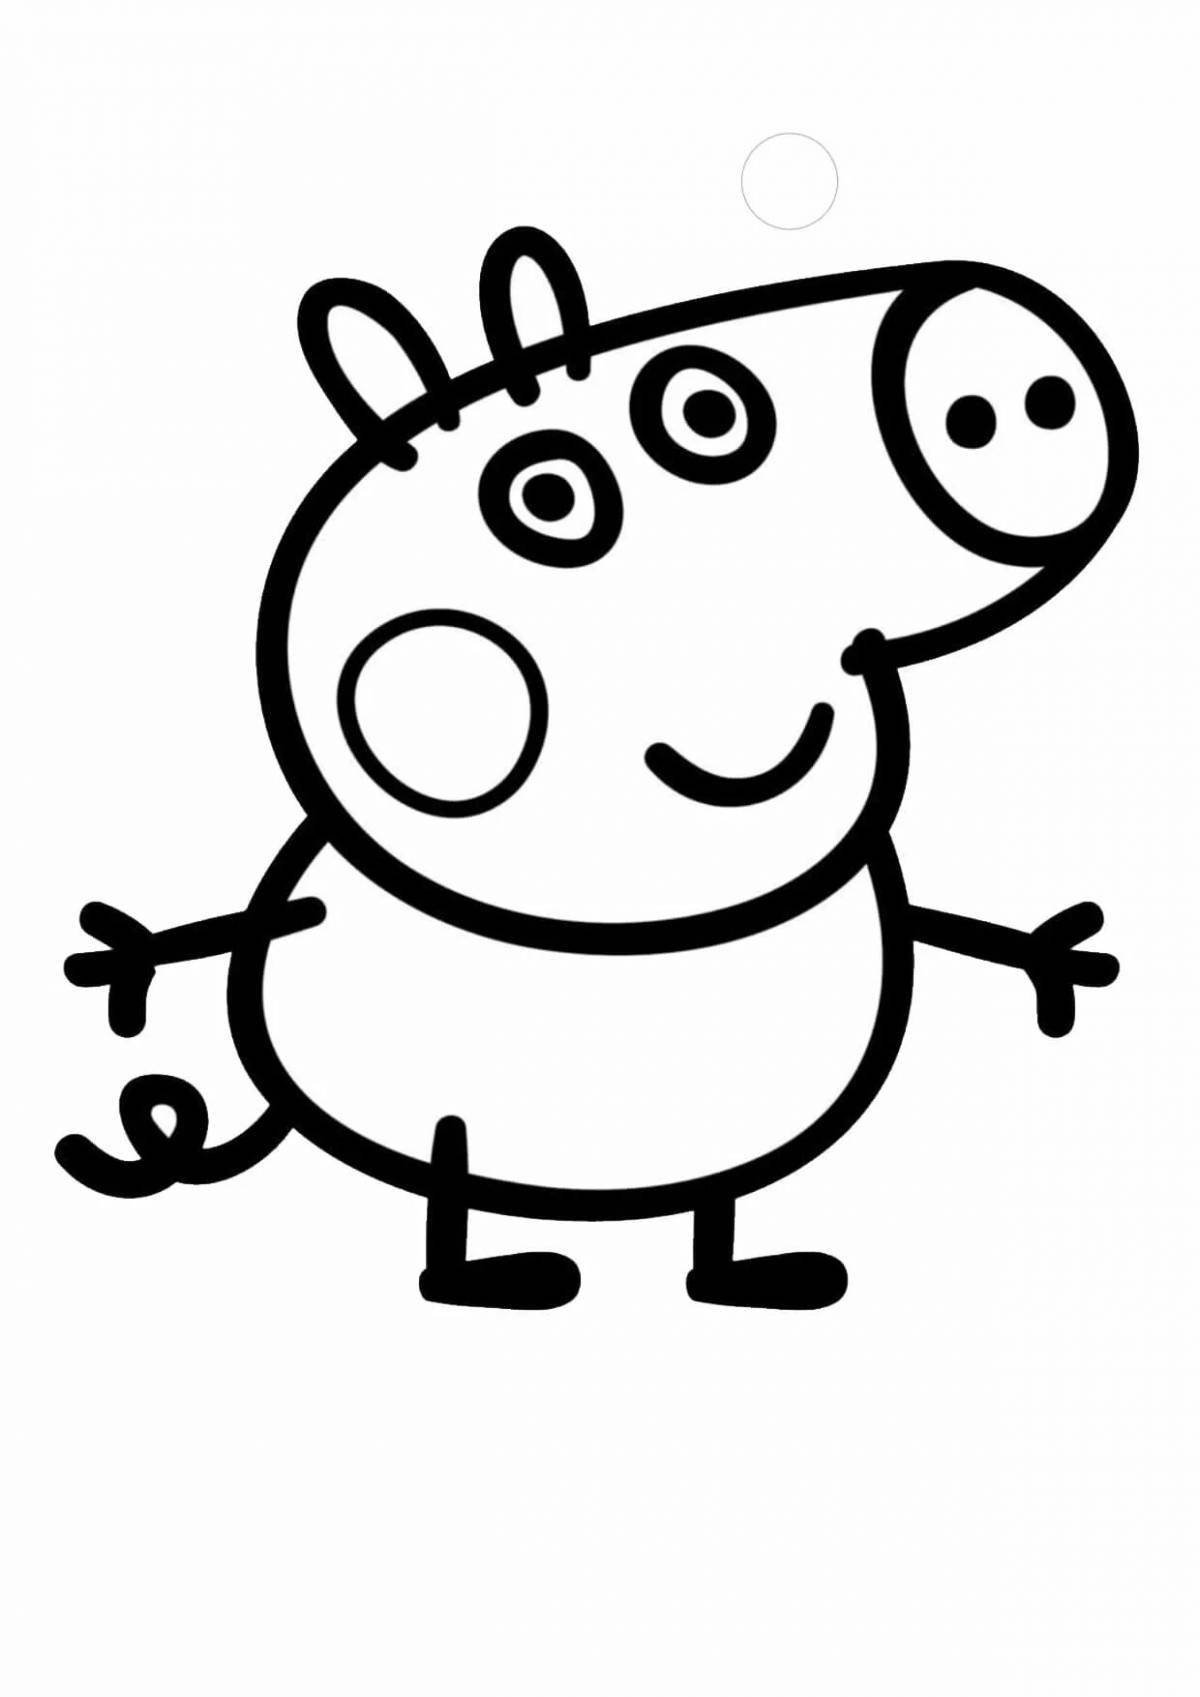 Colourful george and peppa coloring page